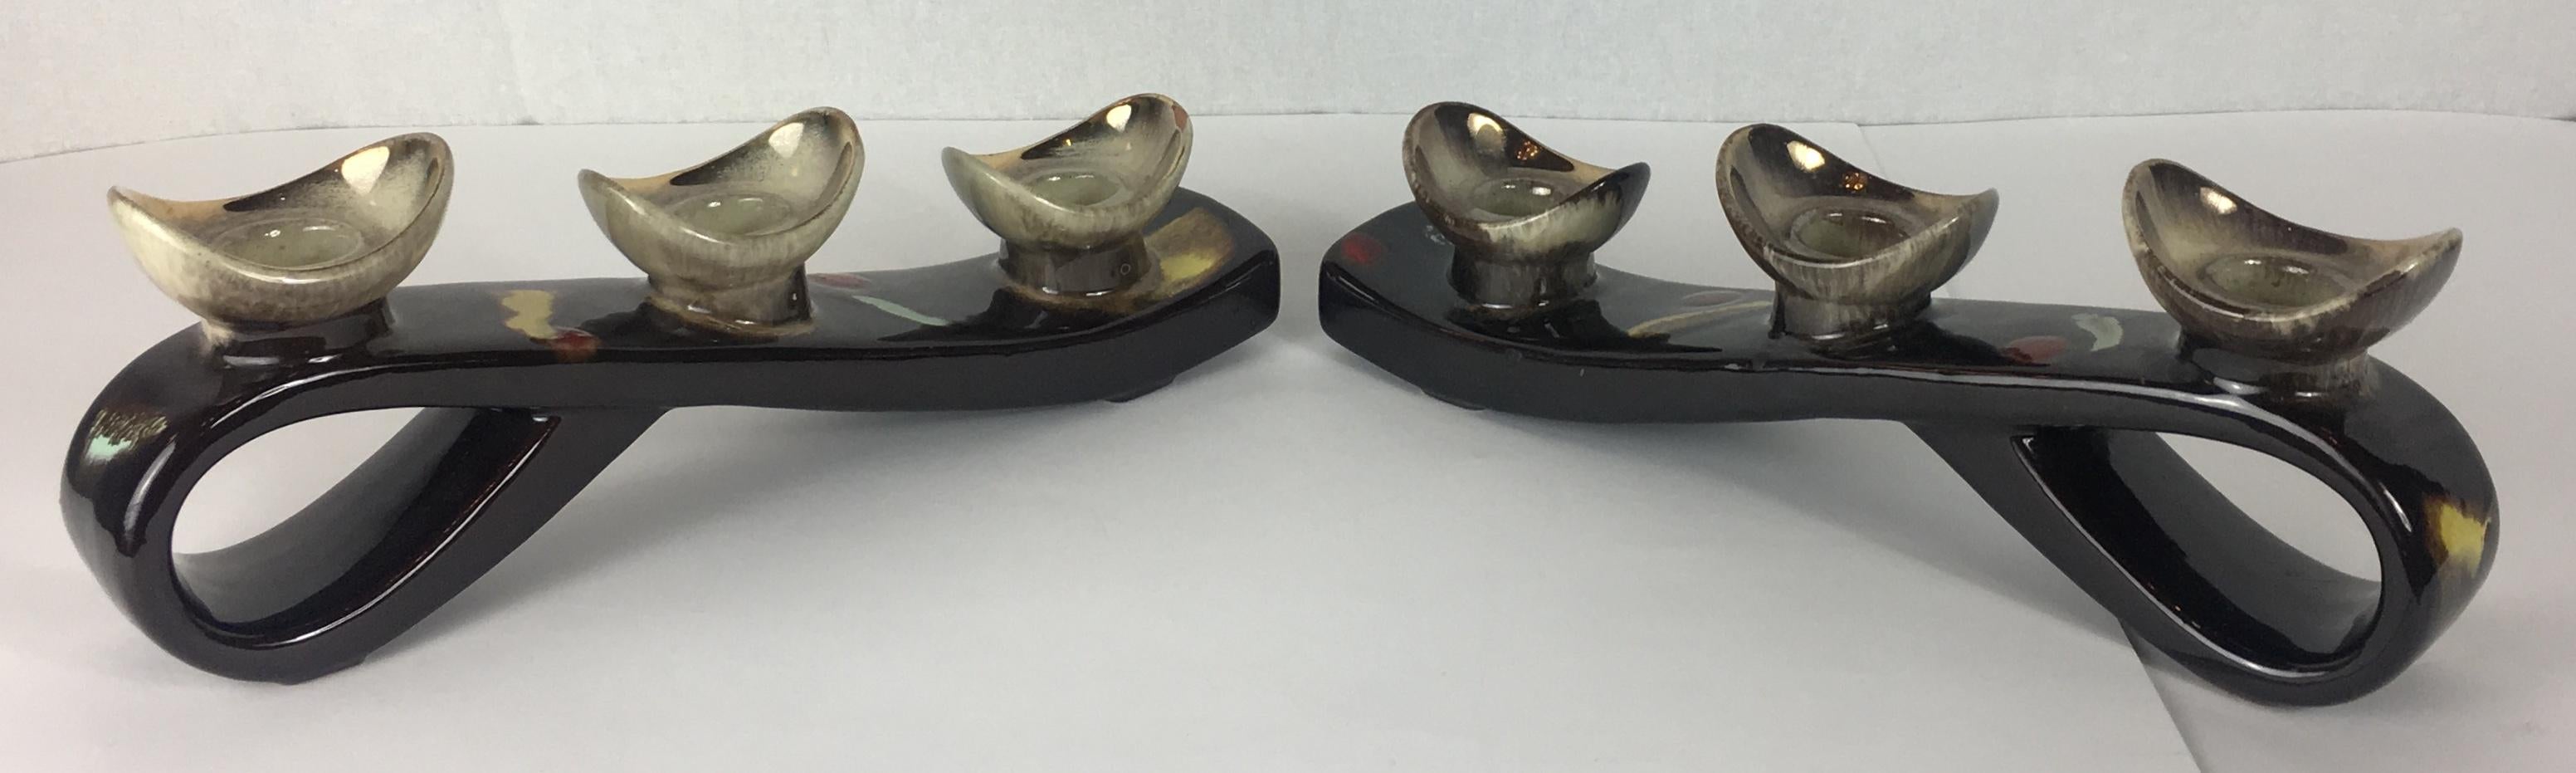 Faience Pair of Mid-Century Modern Glazed Ceramic Candleholders, Vallauris For Sale